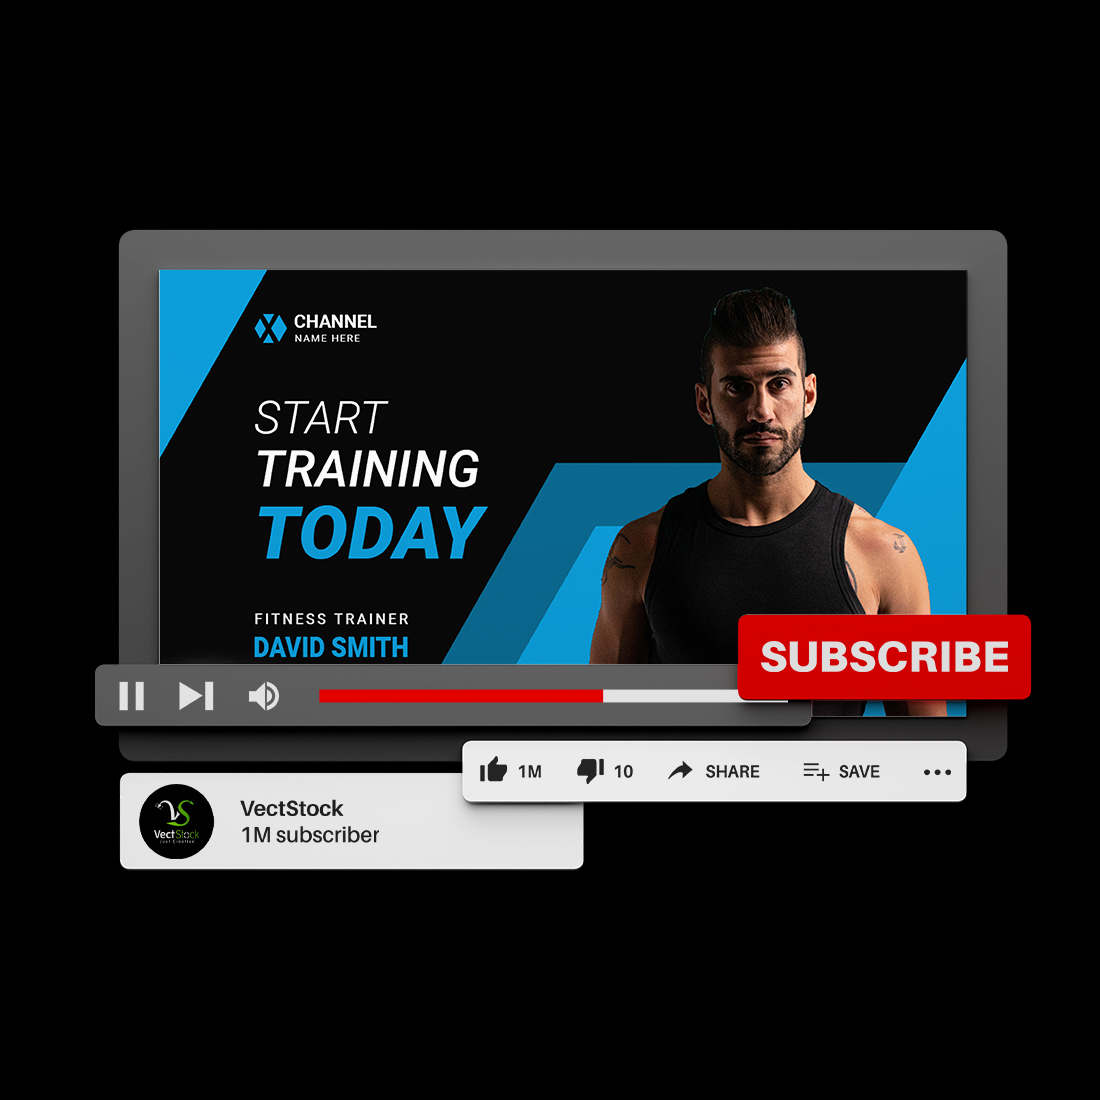 Gym Fitness Youtube thumbnail preview image.